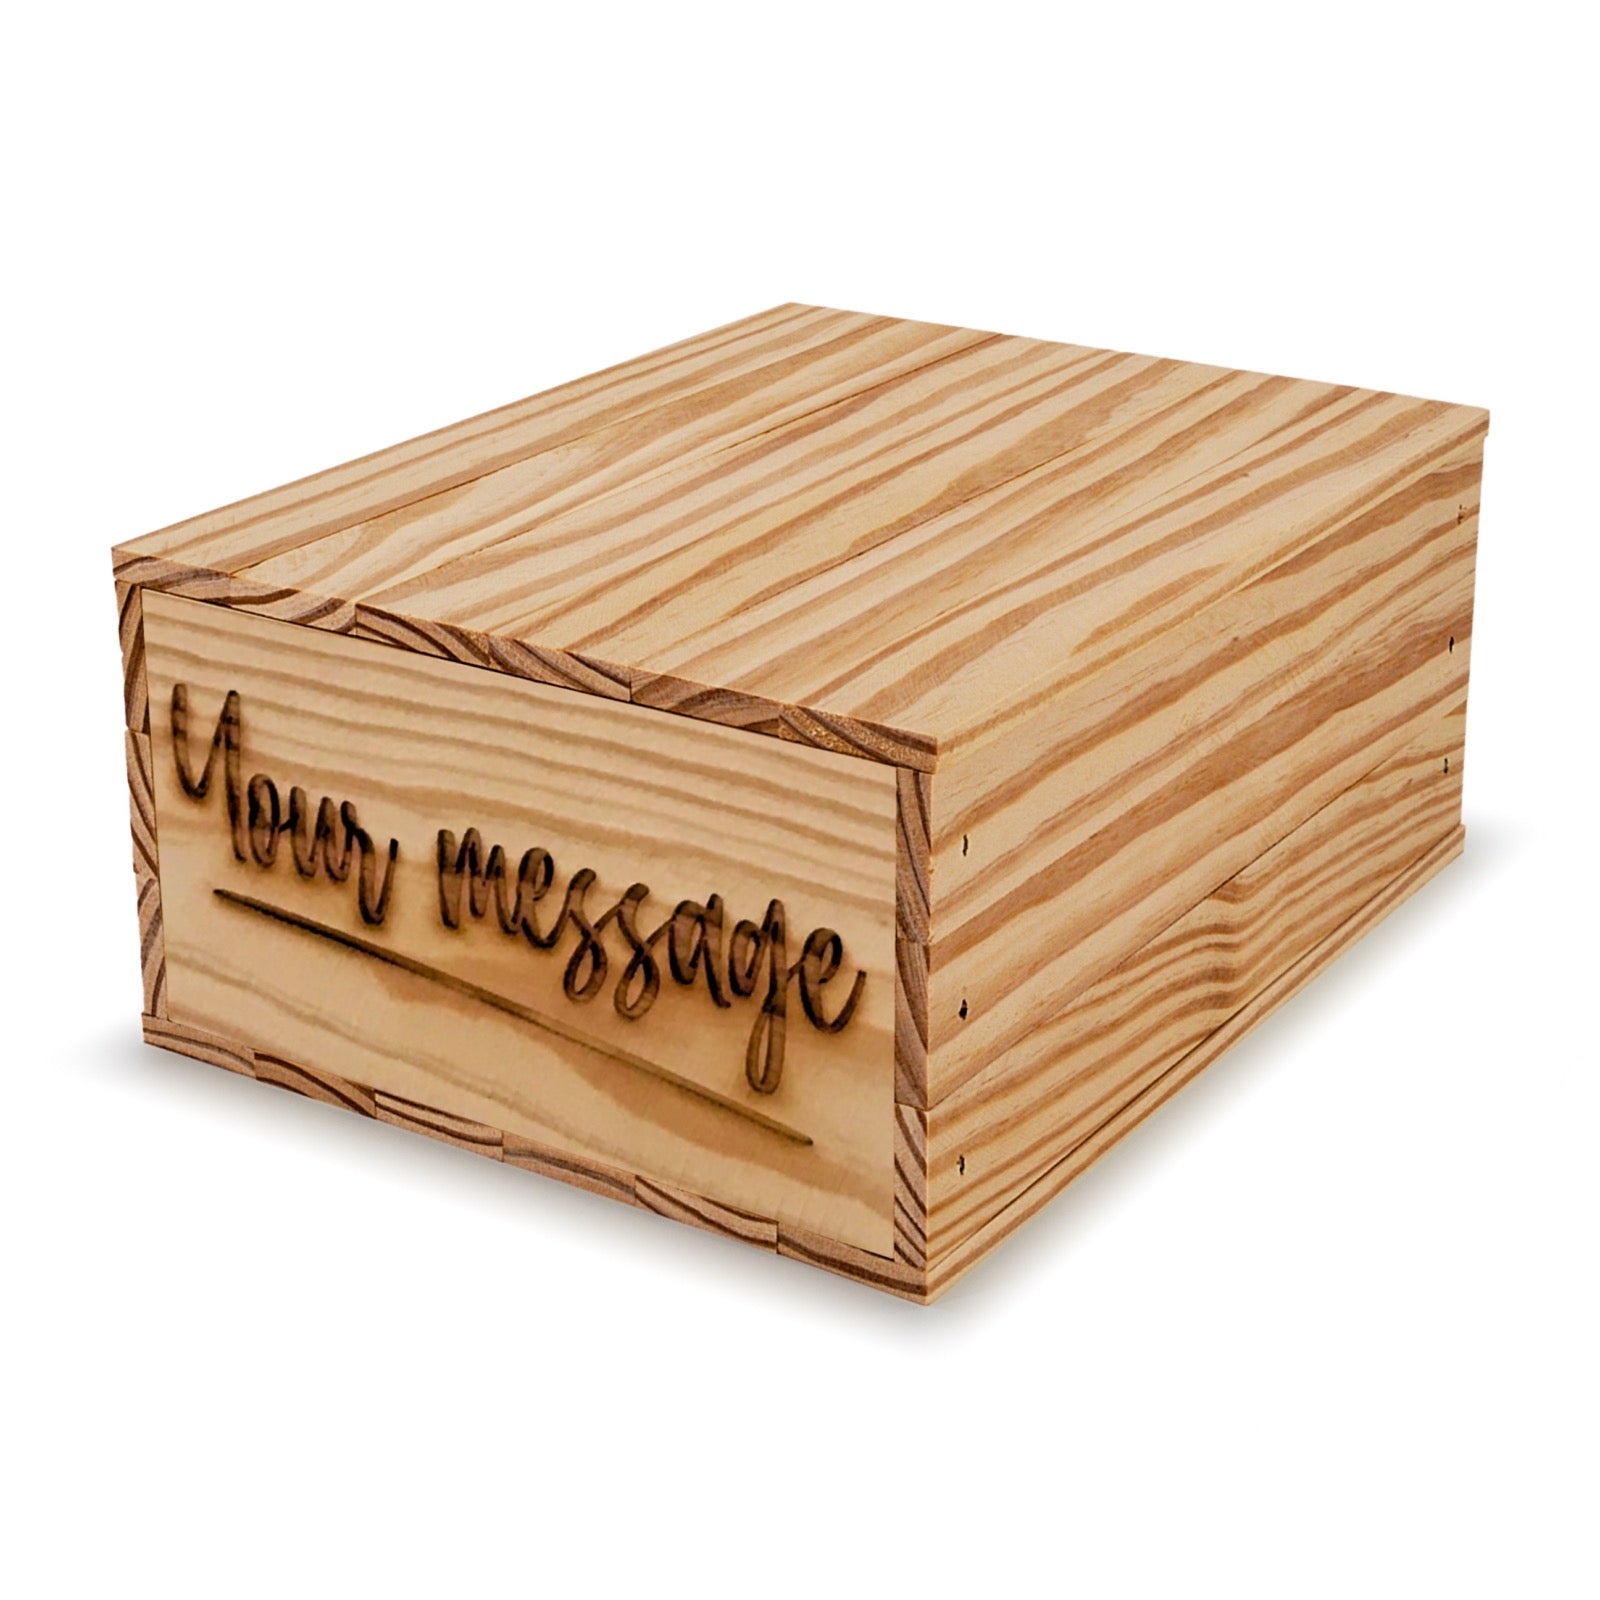 Small wooden crate with lid and custom message 9x8x3.5, 6-BX-9-8-3.5-ST-NW-LL, 12-BX-9-8-3.5-ST-NW-LL, 24-BX-9-8-3.5-ST-NW-LL, 48-BX-9-8-3.5-ST-NW-LL, 96-BX-9-8-3.5-ST-NW-LL